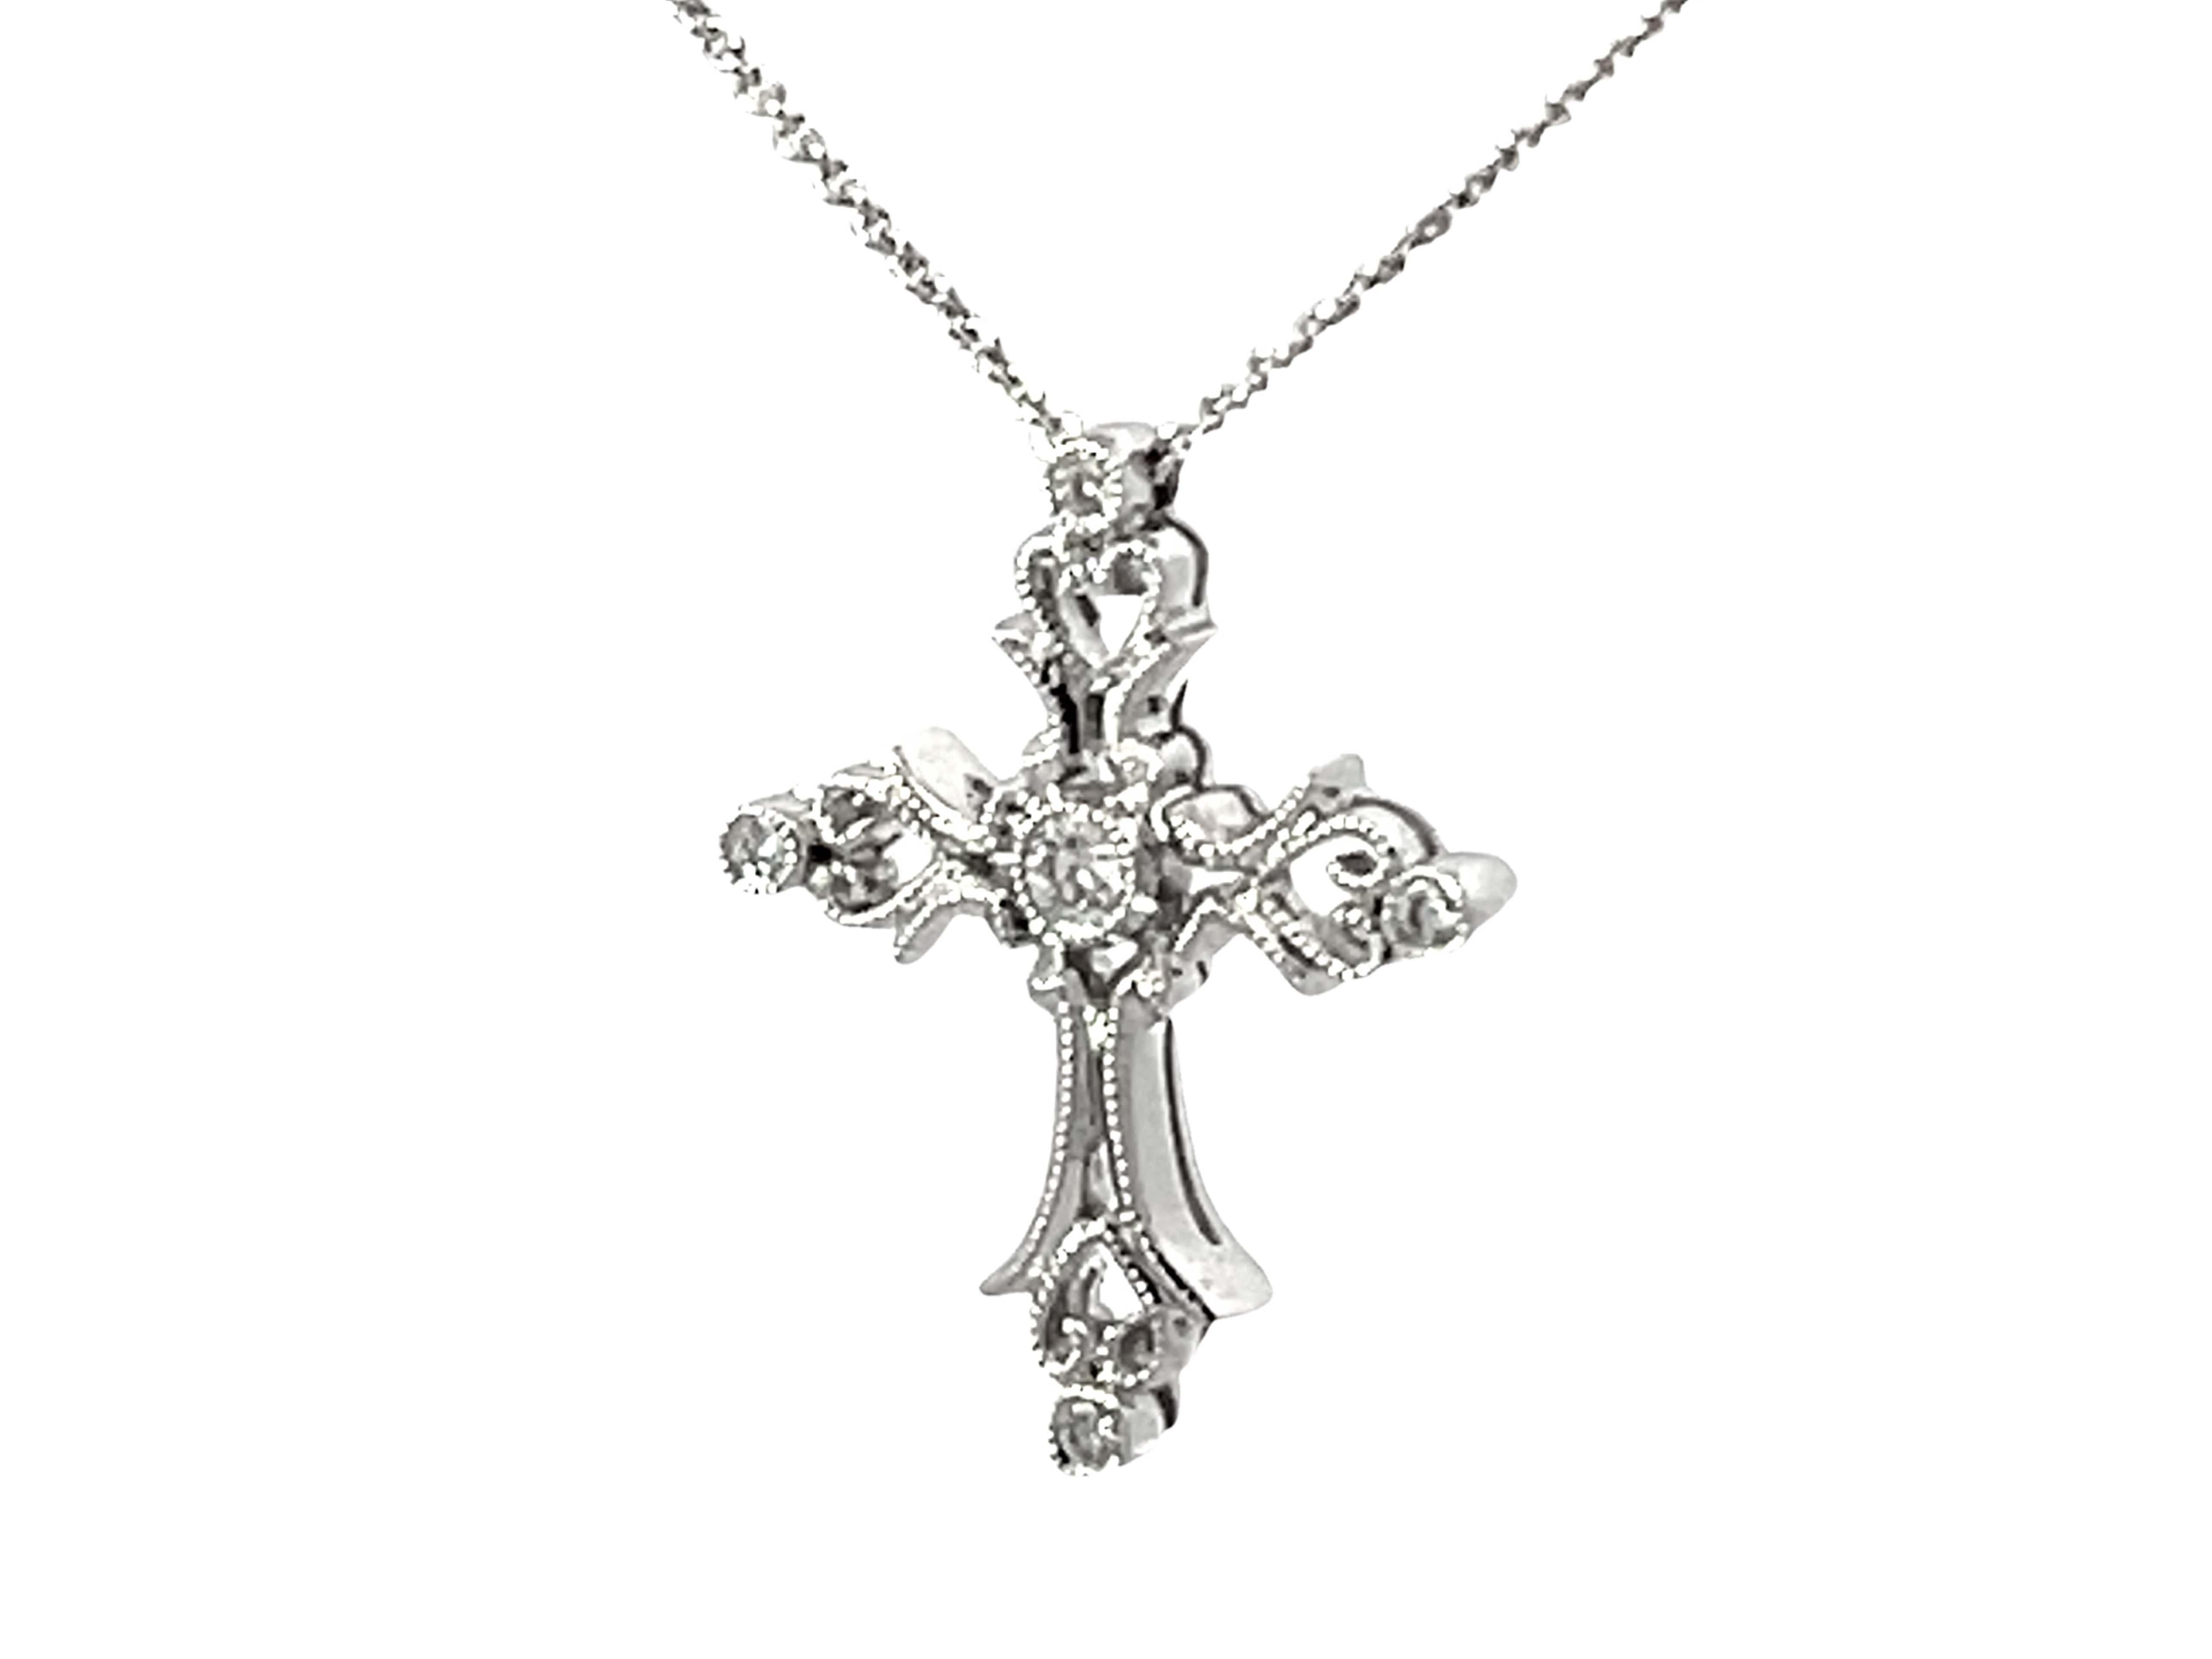 Brilliant Cut Beverley K Diamond Cross Necklace Solid White Gold For Sale